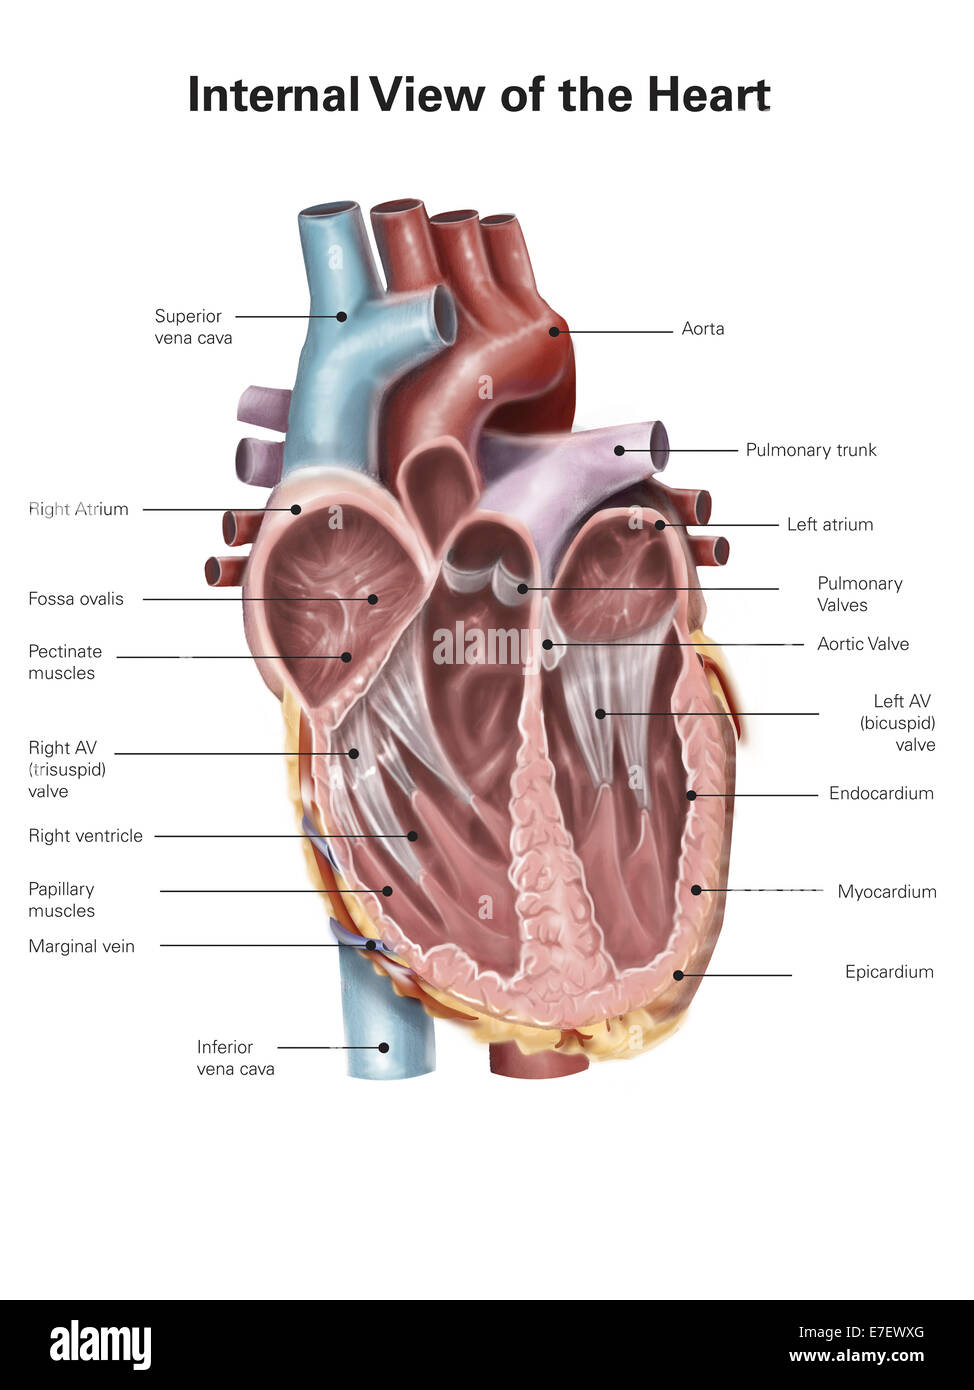 Internal view of the human heart. Stock Photo